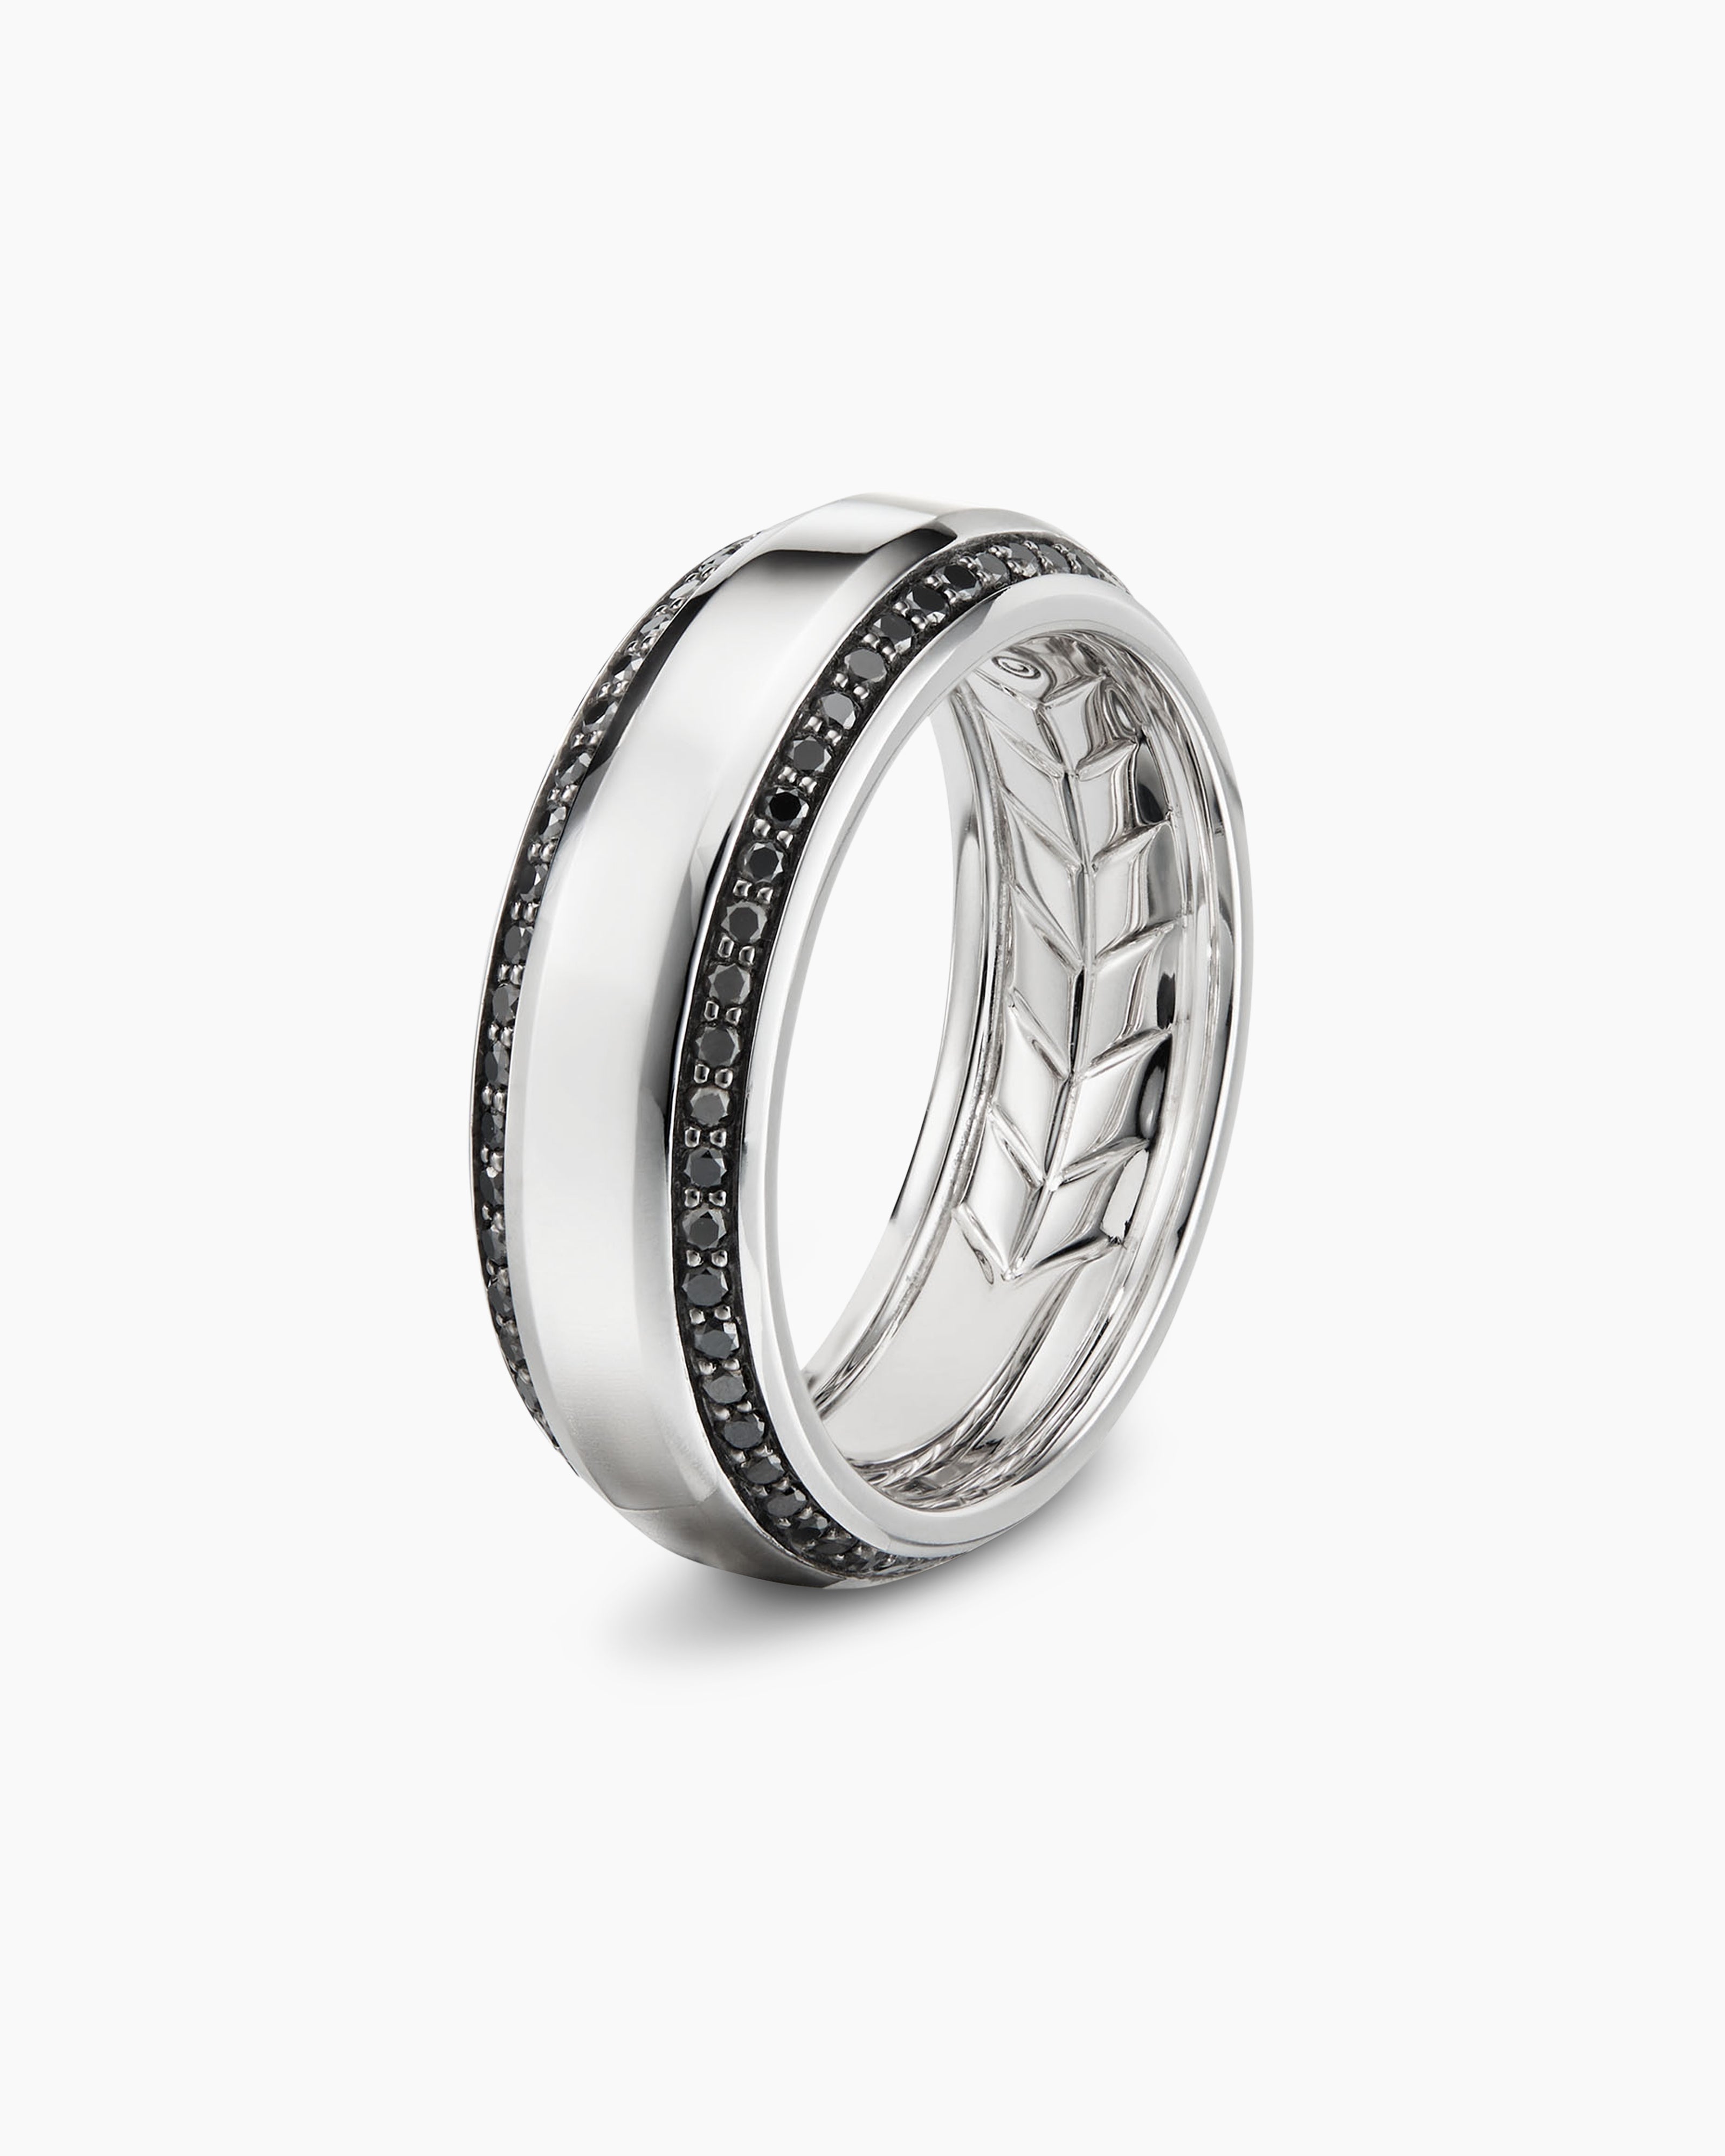 Stylish Black Broad Striped Silver Stainless Steel Ring | M135-May-102 |  Cilory.com